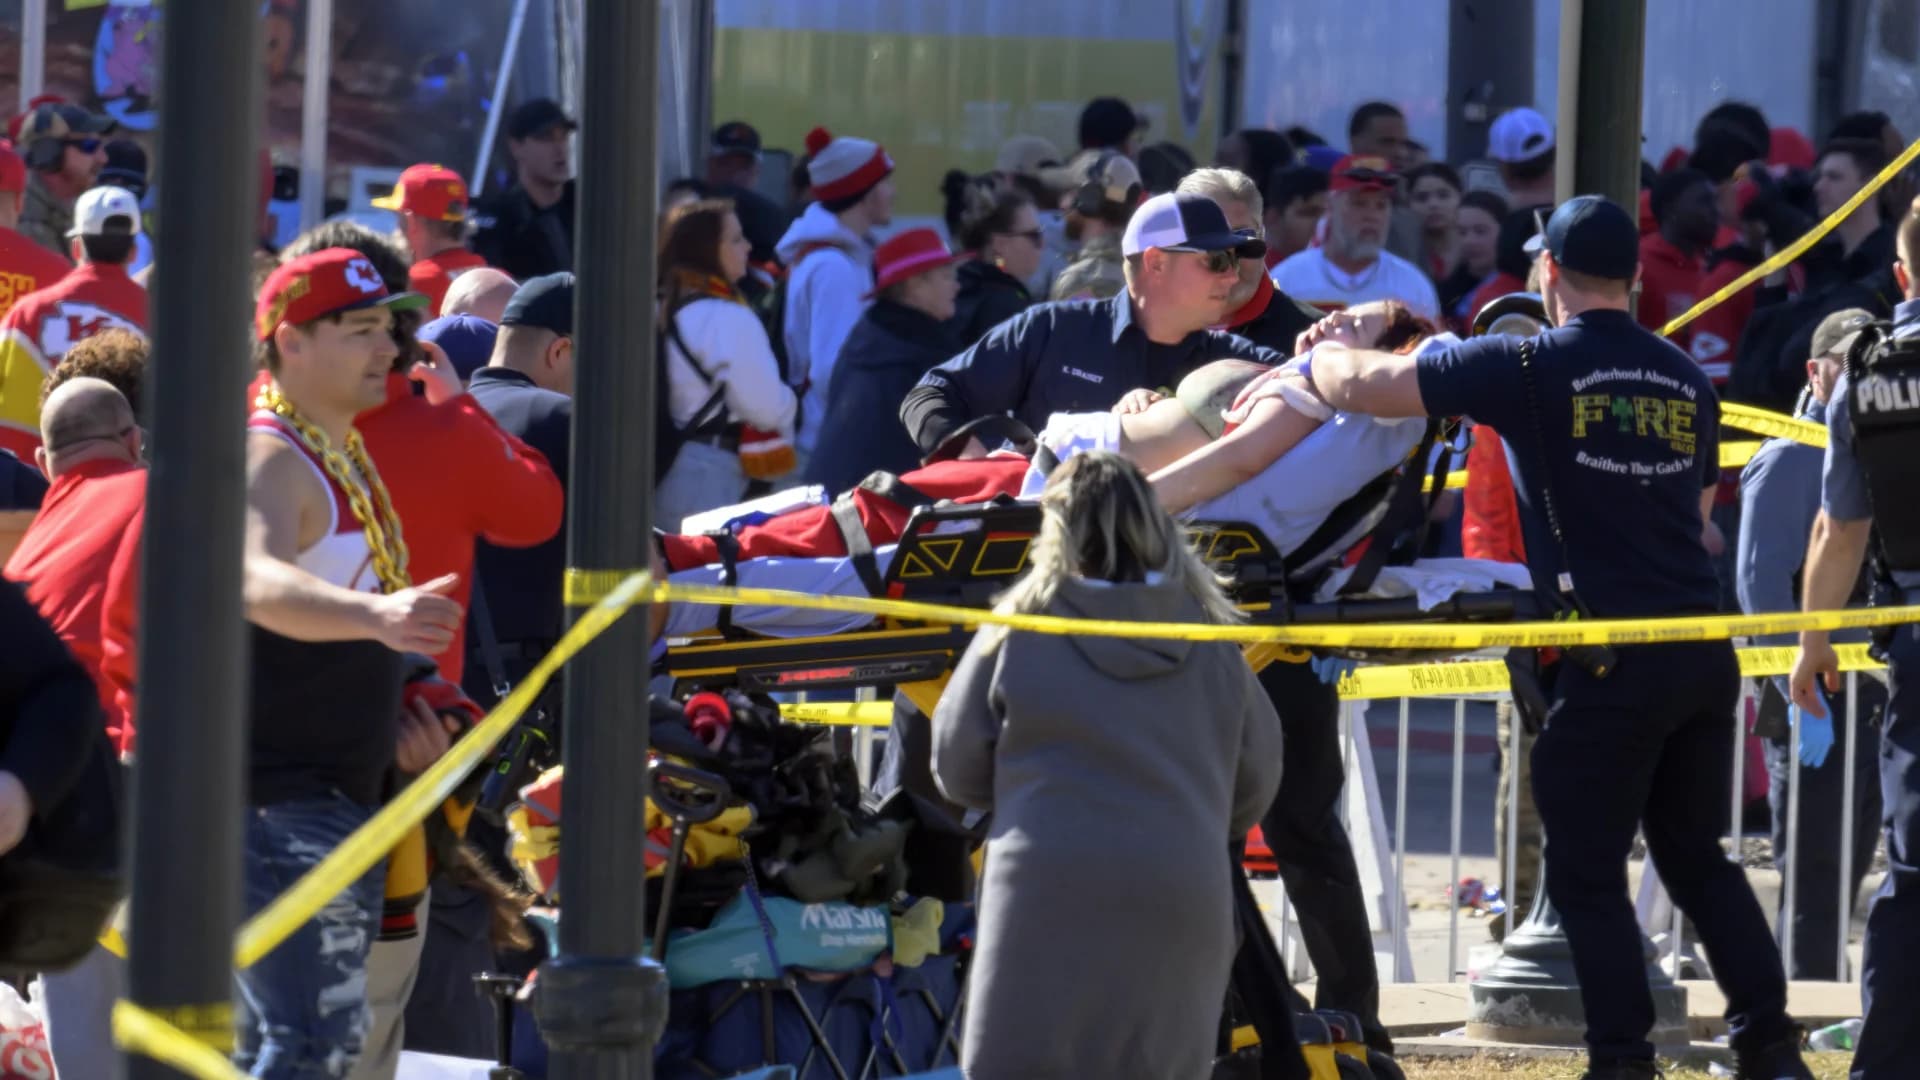 At least 8 children among 22 hit by gunfire at end of Chiefs' Super Bowl parade; 1 person killed